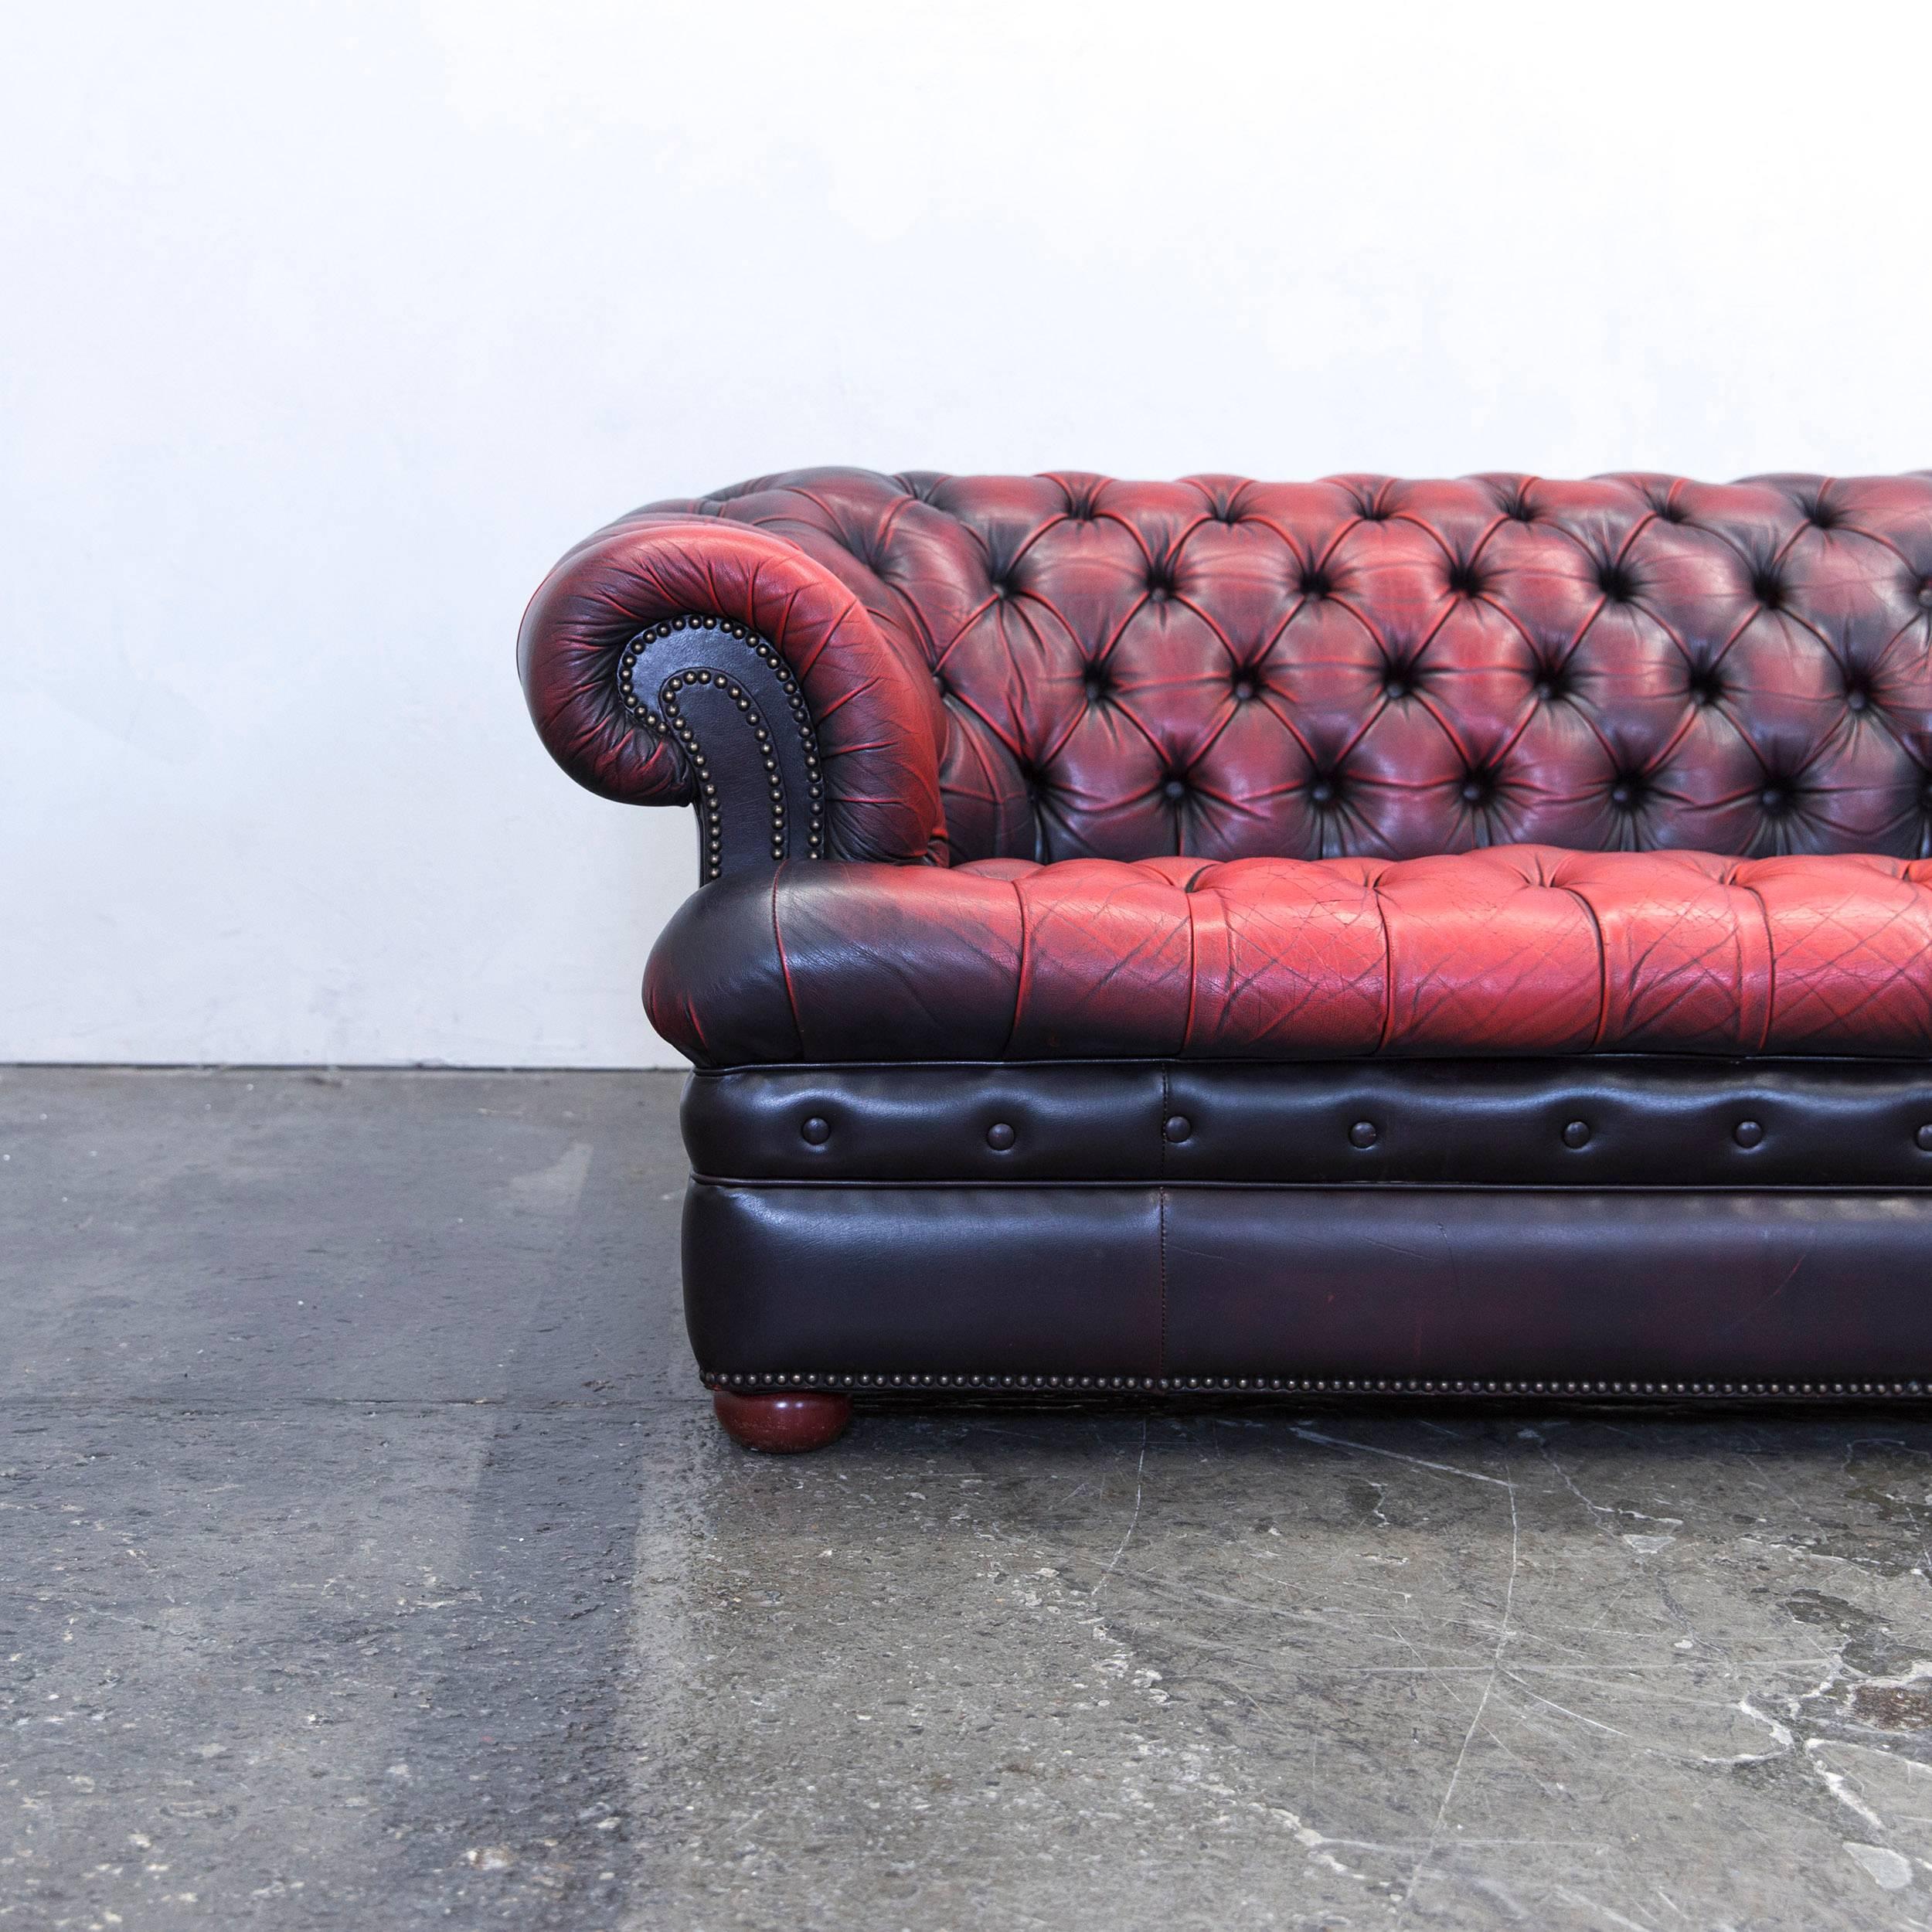 Red brown colored Chesterfield leather sofa in a vintage design, made for pure comfort and elegance.